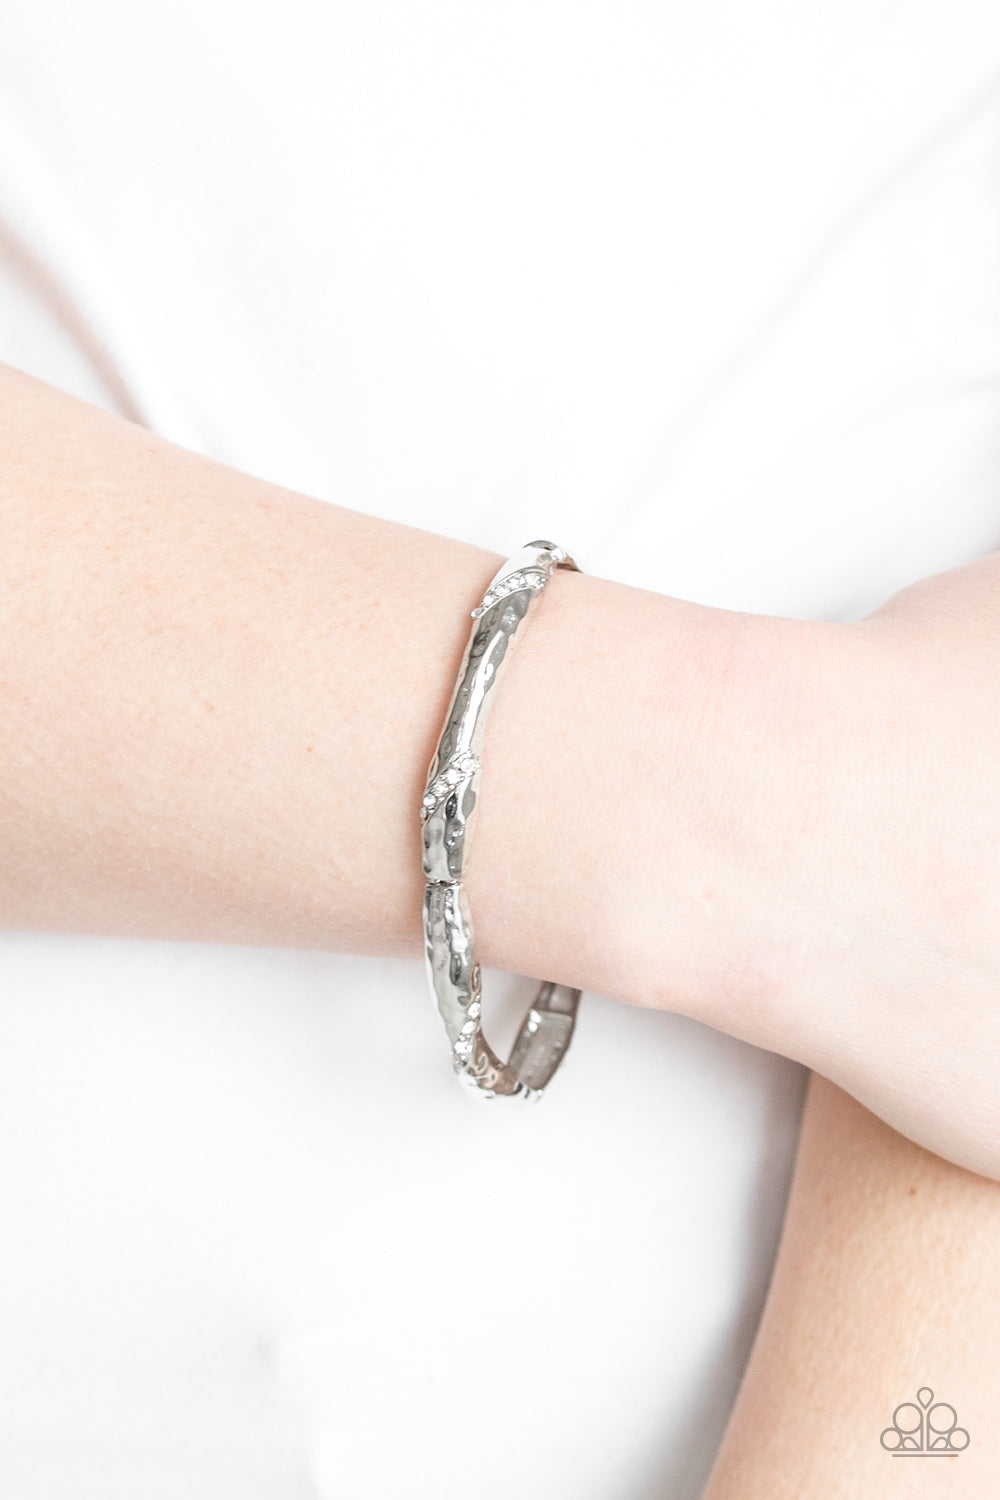 WATCH OUT FOR ICE - WHITE RHINESTONES DAINTY STRETCH BANGLE BRACELET